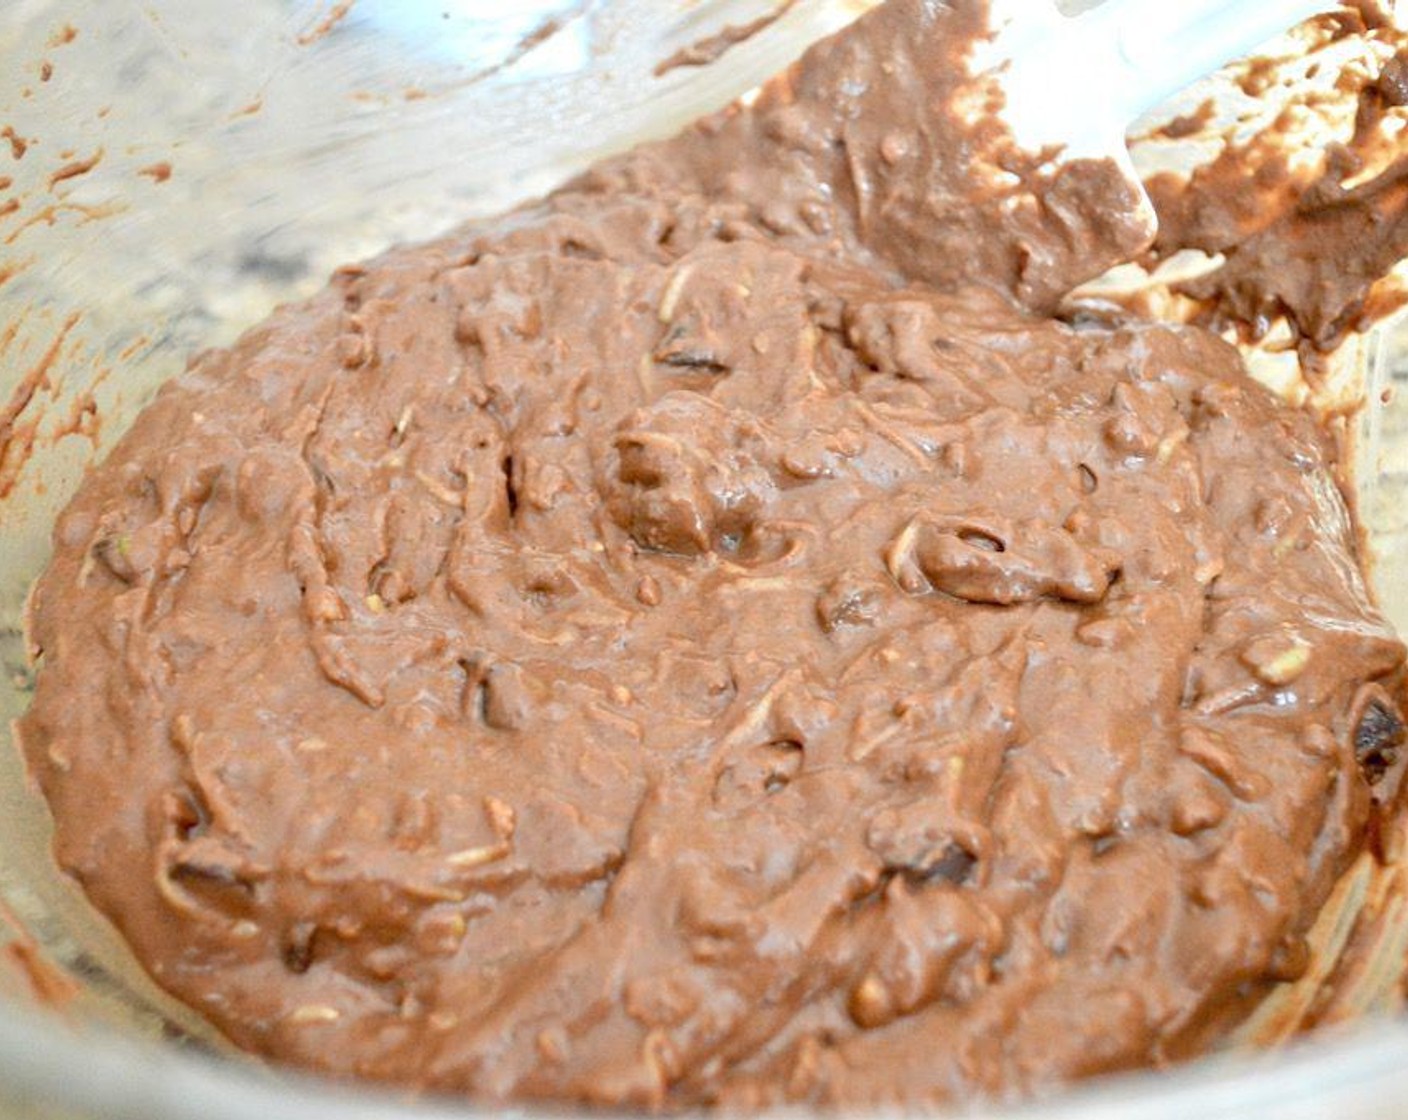 step 3 Then whisk the cooled Coconut Oil (2 Tbsp), Egg (1), Vanilla Extract (1/2 tsp), Chocolate Almond Milk (1/2 cup), Honey (1/3 cup), and Cinnamon Apple Sauce (1/4 cup) together thoroughly in another bowl. Pour those wet ingredients into the dry ingredients and whisk it all together into a thick batter.